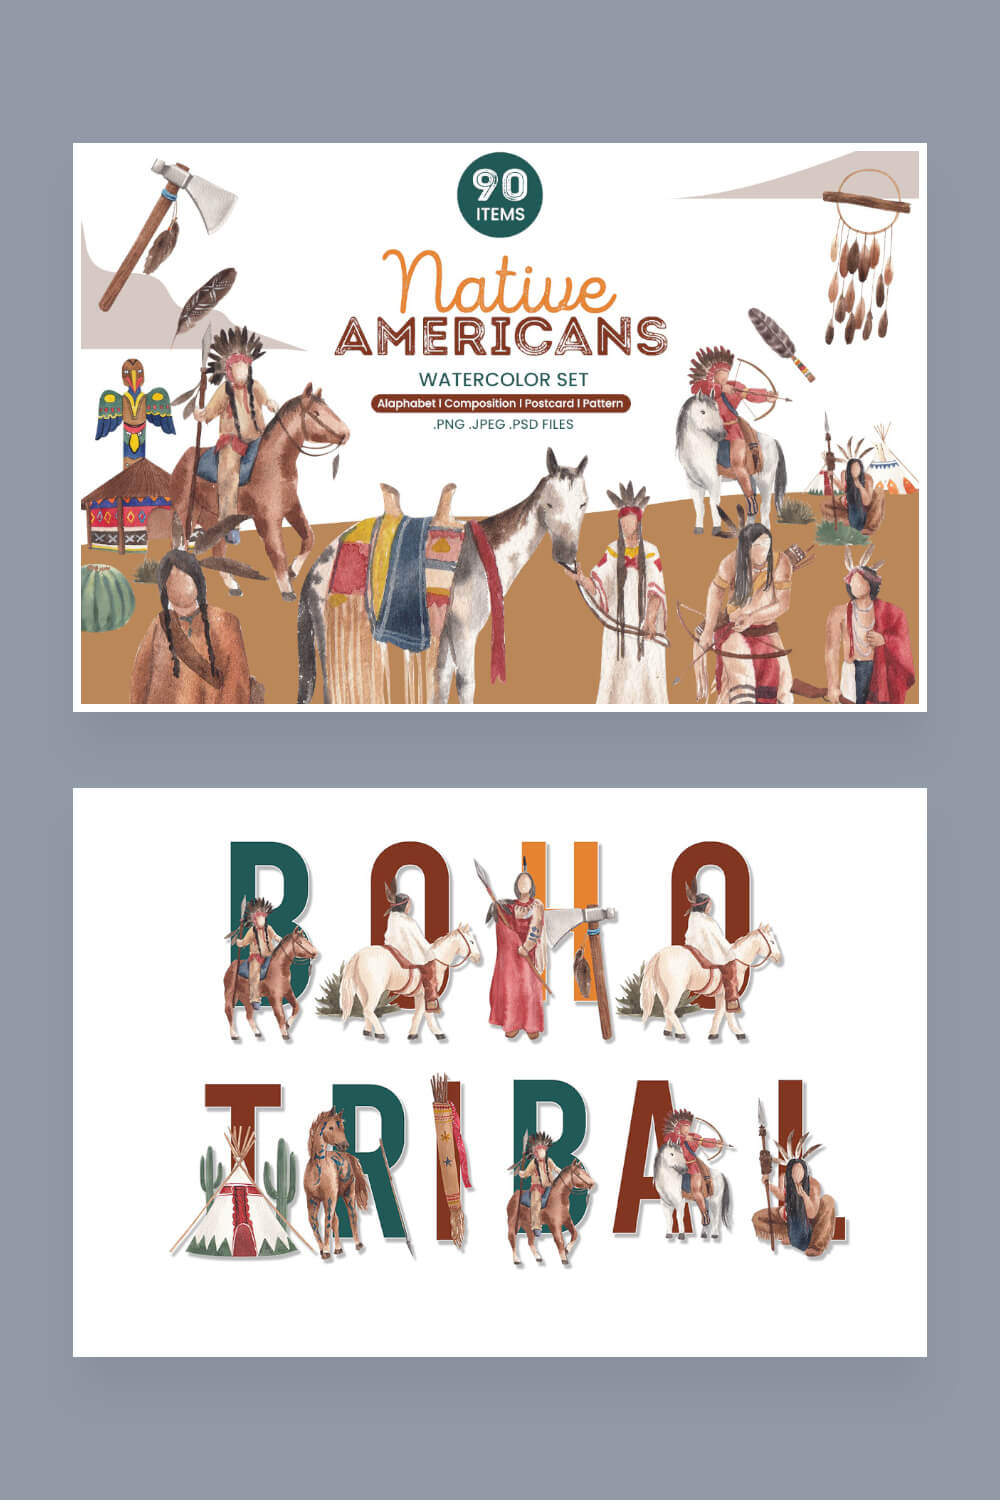 Collage of images of painted Indians with horses and on the background of large letters.